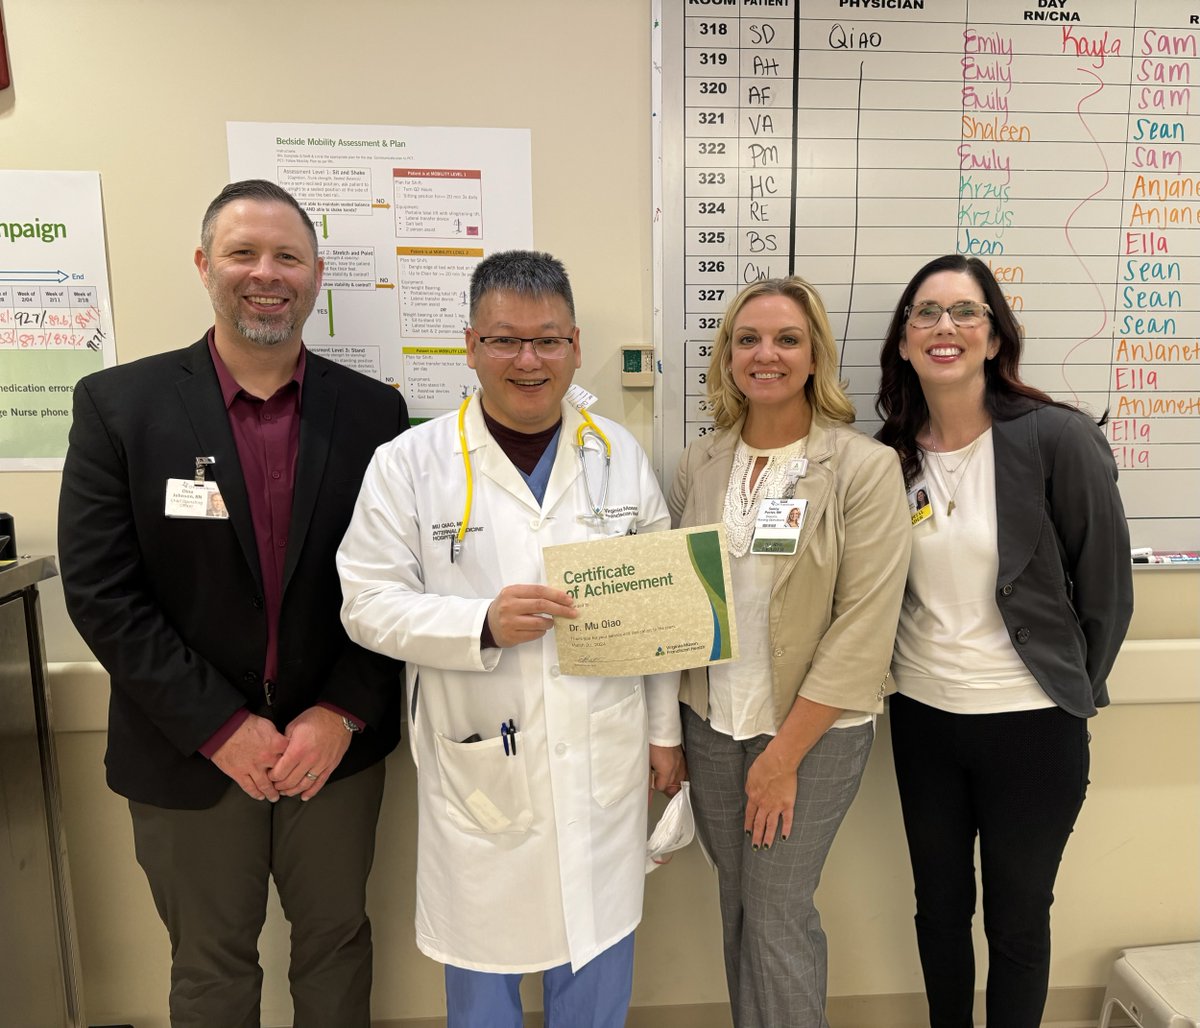 Congratulations to Dr. Mu Qiao, hospitalist, St. Anthony Hospital's latest Care Team Rounding Physician Champion. Dr. Qiao was nominated by a group of nurses as a provider who is improving communication and engagement with our patients and their families. We appreciate you!